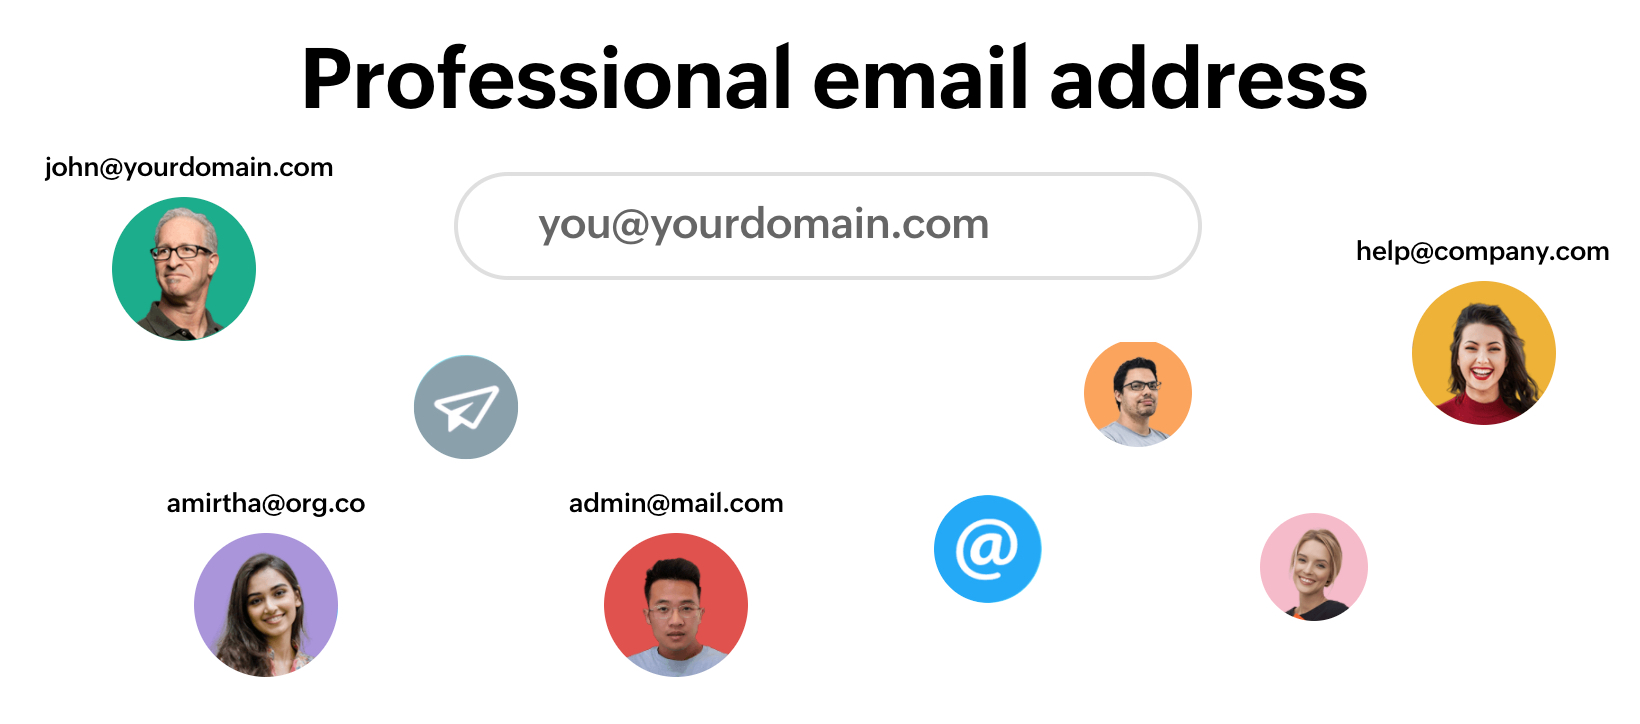 How to Create a Professional Email Address for Your Business?